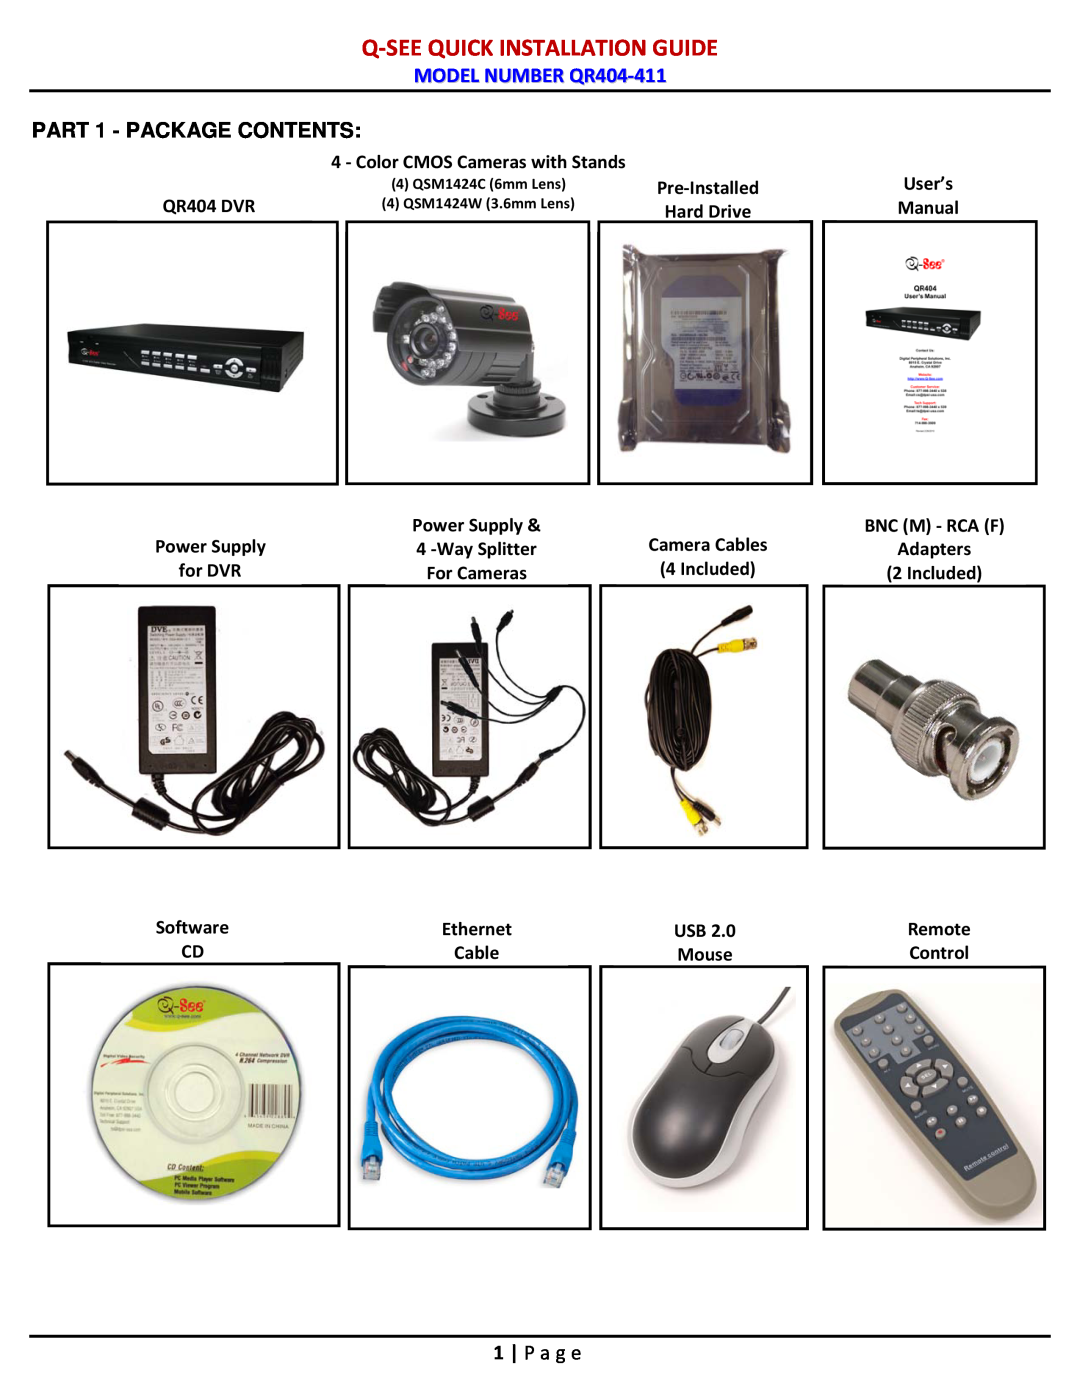 Q-See qr404-411 Q-See Quick Installation Guide, MODEL NUMBER QR404-411, PART 1 - PACKAGE CONTENTS, P a g e, QR404 DVR 